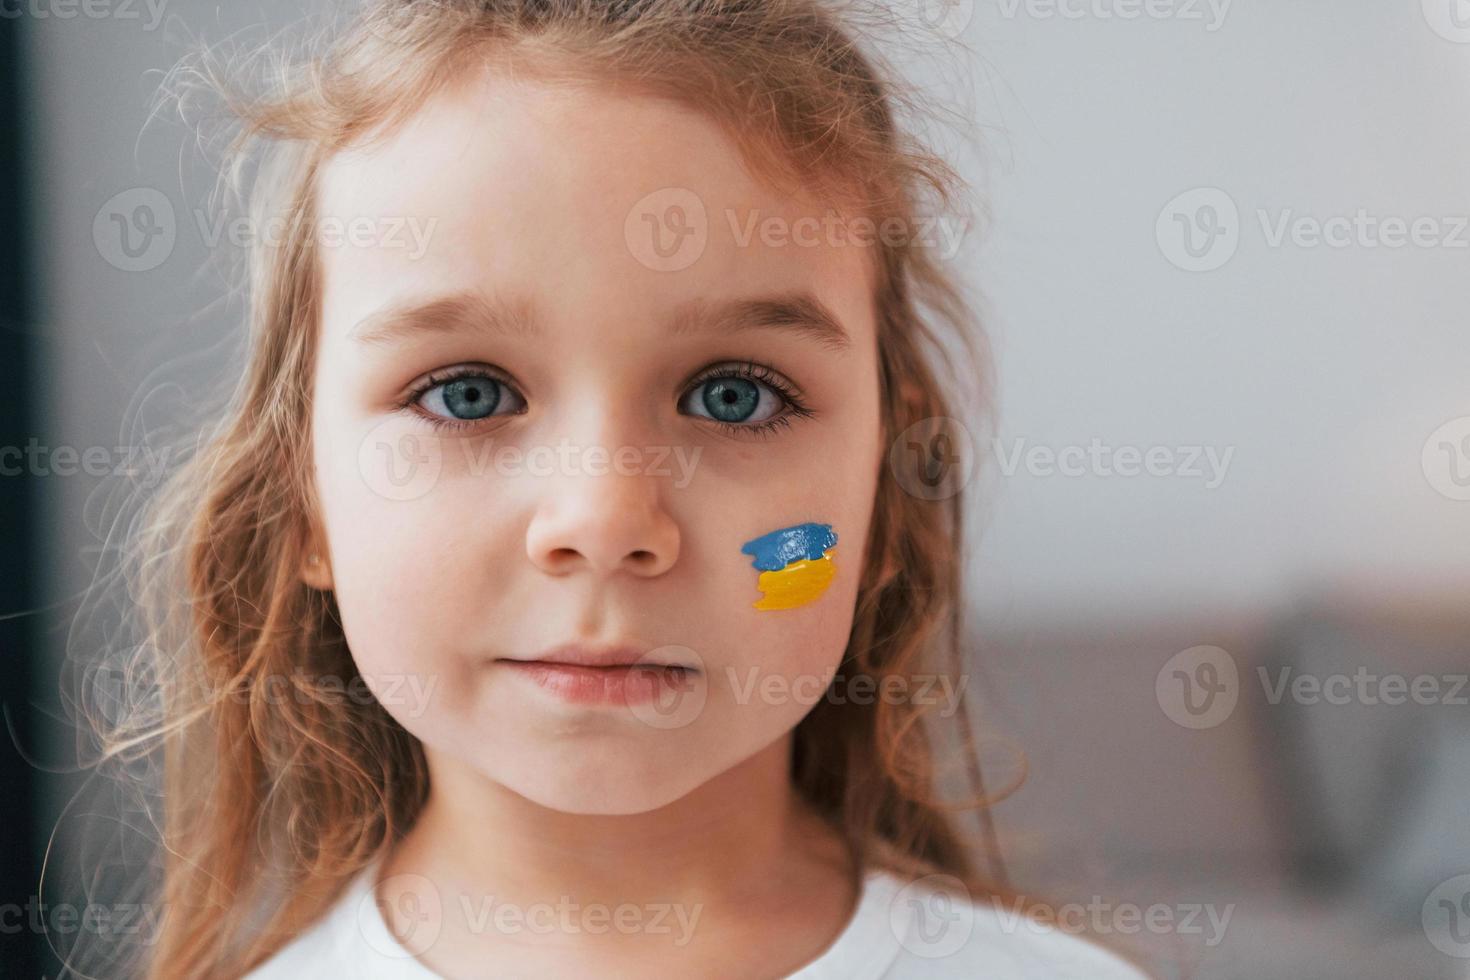 Close up view. Portrait of little girl with Ukrainian flag make up on the face photo